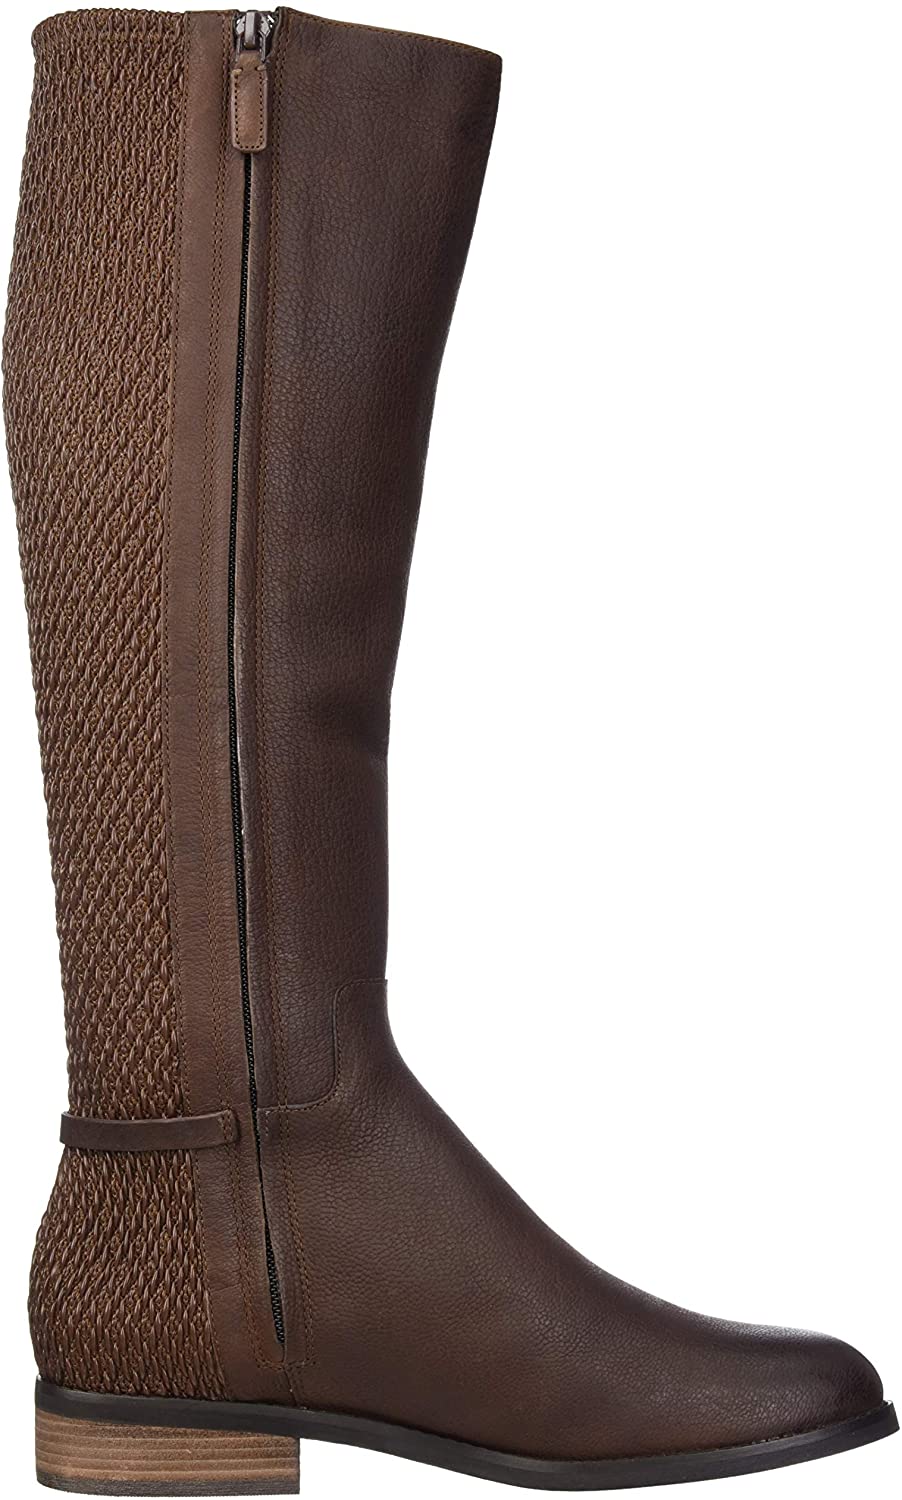 Cole Haan Women's Isabell Stretch Boot Mid, Dark Ch Chestnut Leather